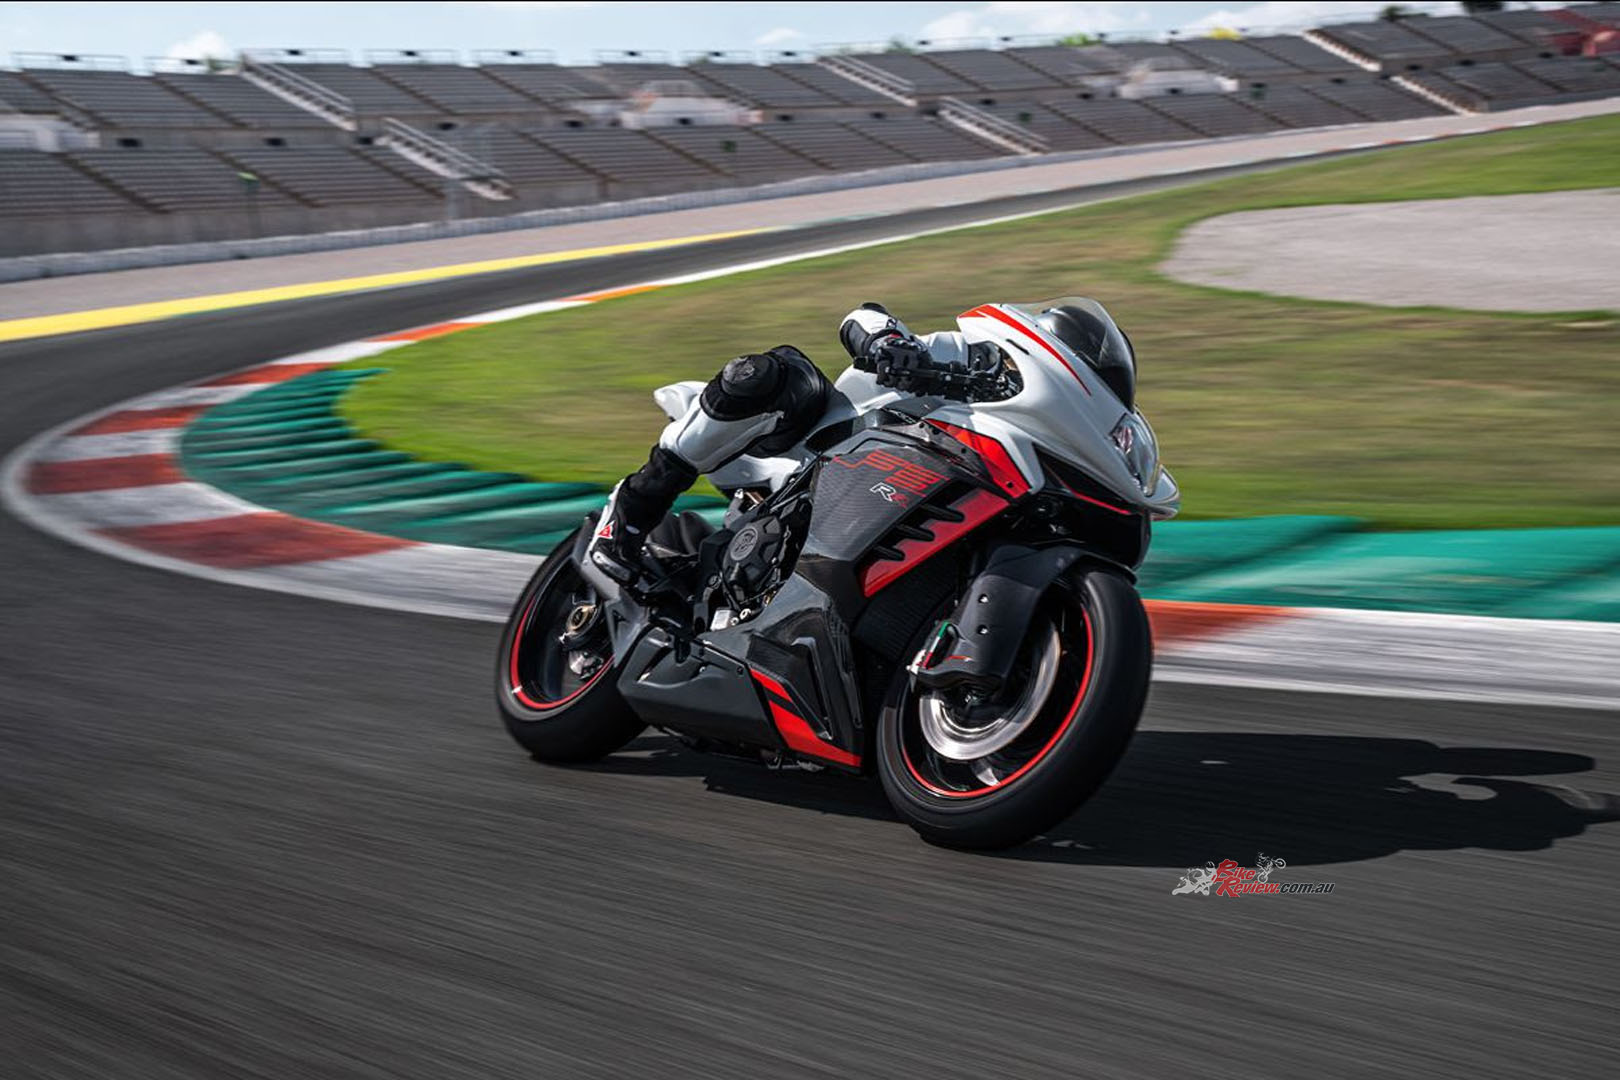 MV Agusta say the RR undoubtedly represents the icing on the cake of the F3 range, the pinnacle of performance, fitting and technological evolution.